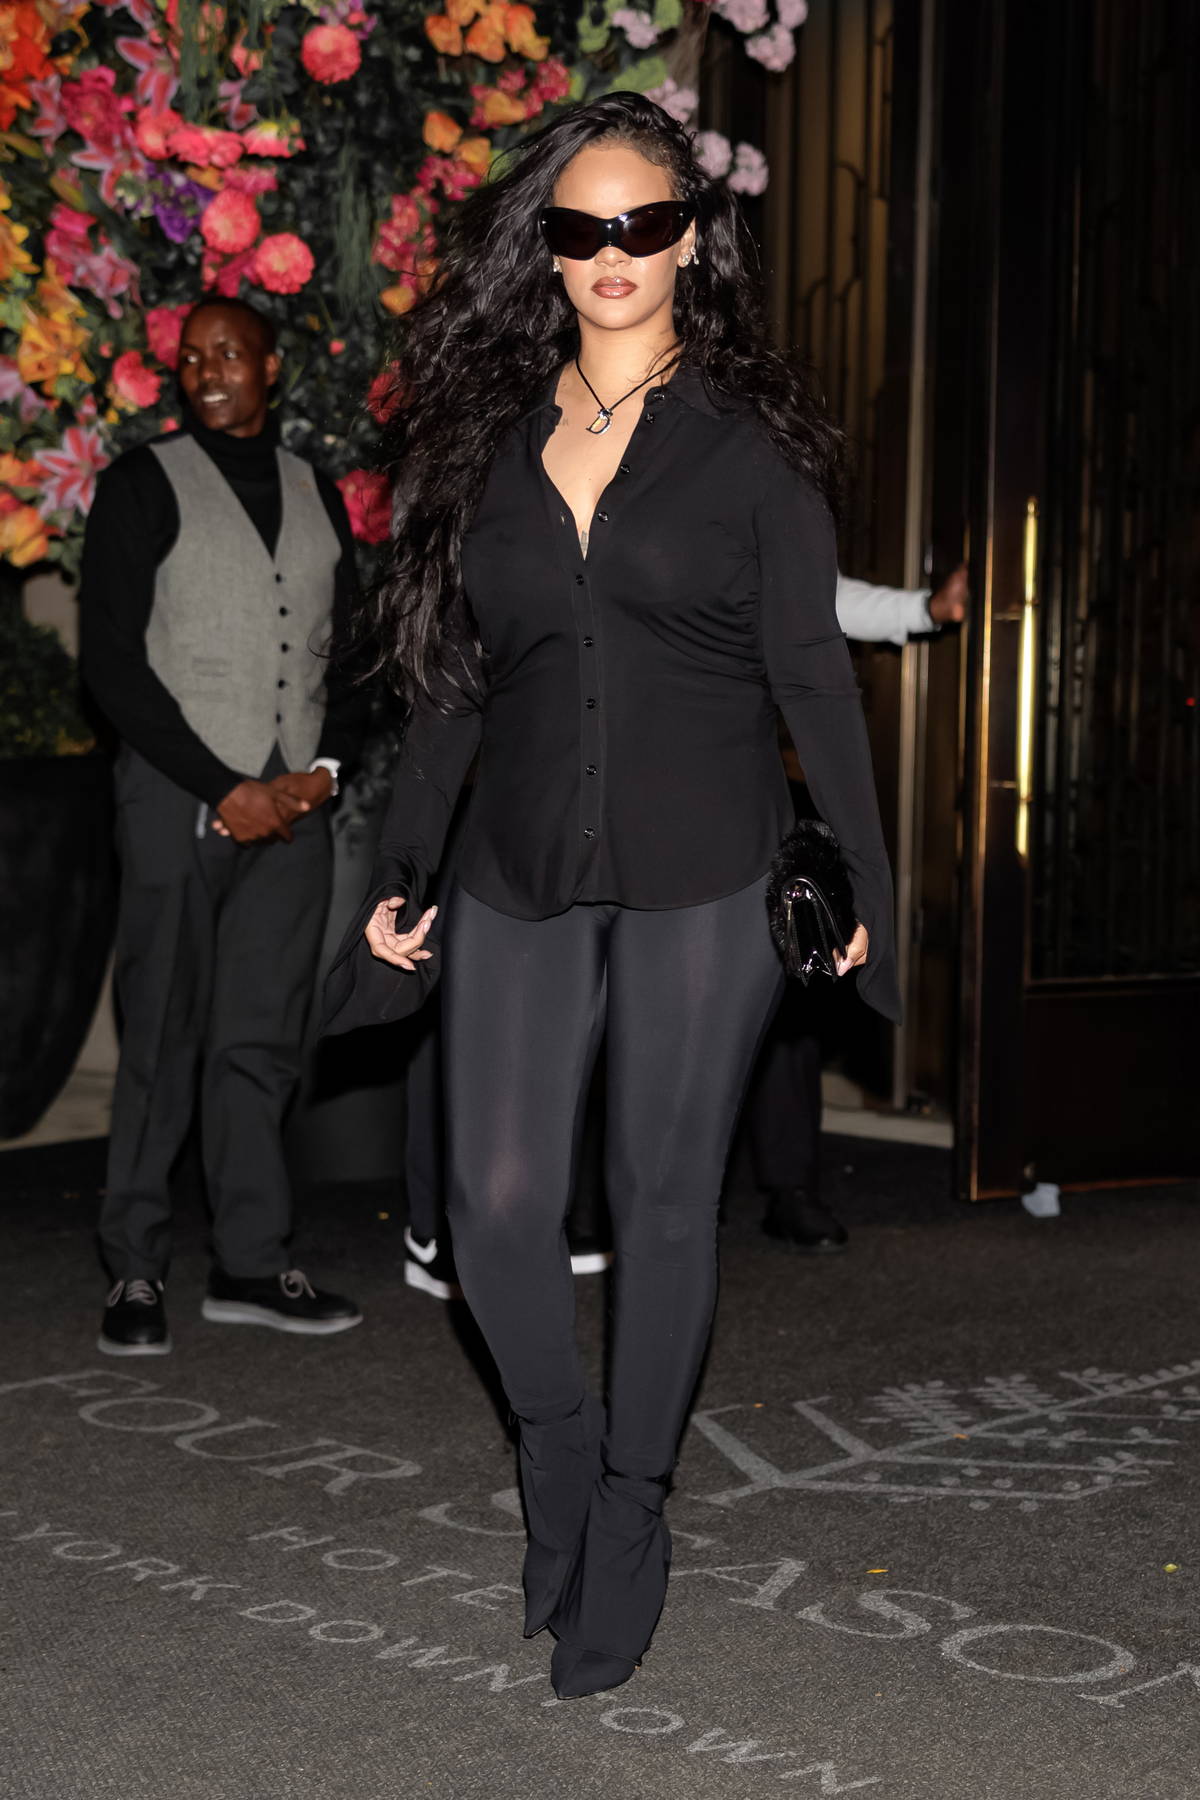 https://www.celebsfirst.com/wp-content/uploads/2022/11/rihanna-looks-stunning-a-black-shirt-with-matching-leggings-and-heels-while-stepping-out-for-dinner-in-new-york-city-051122_2.jpg